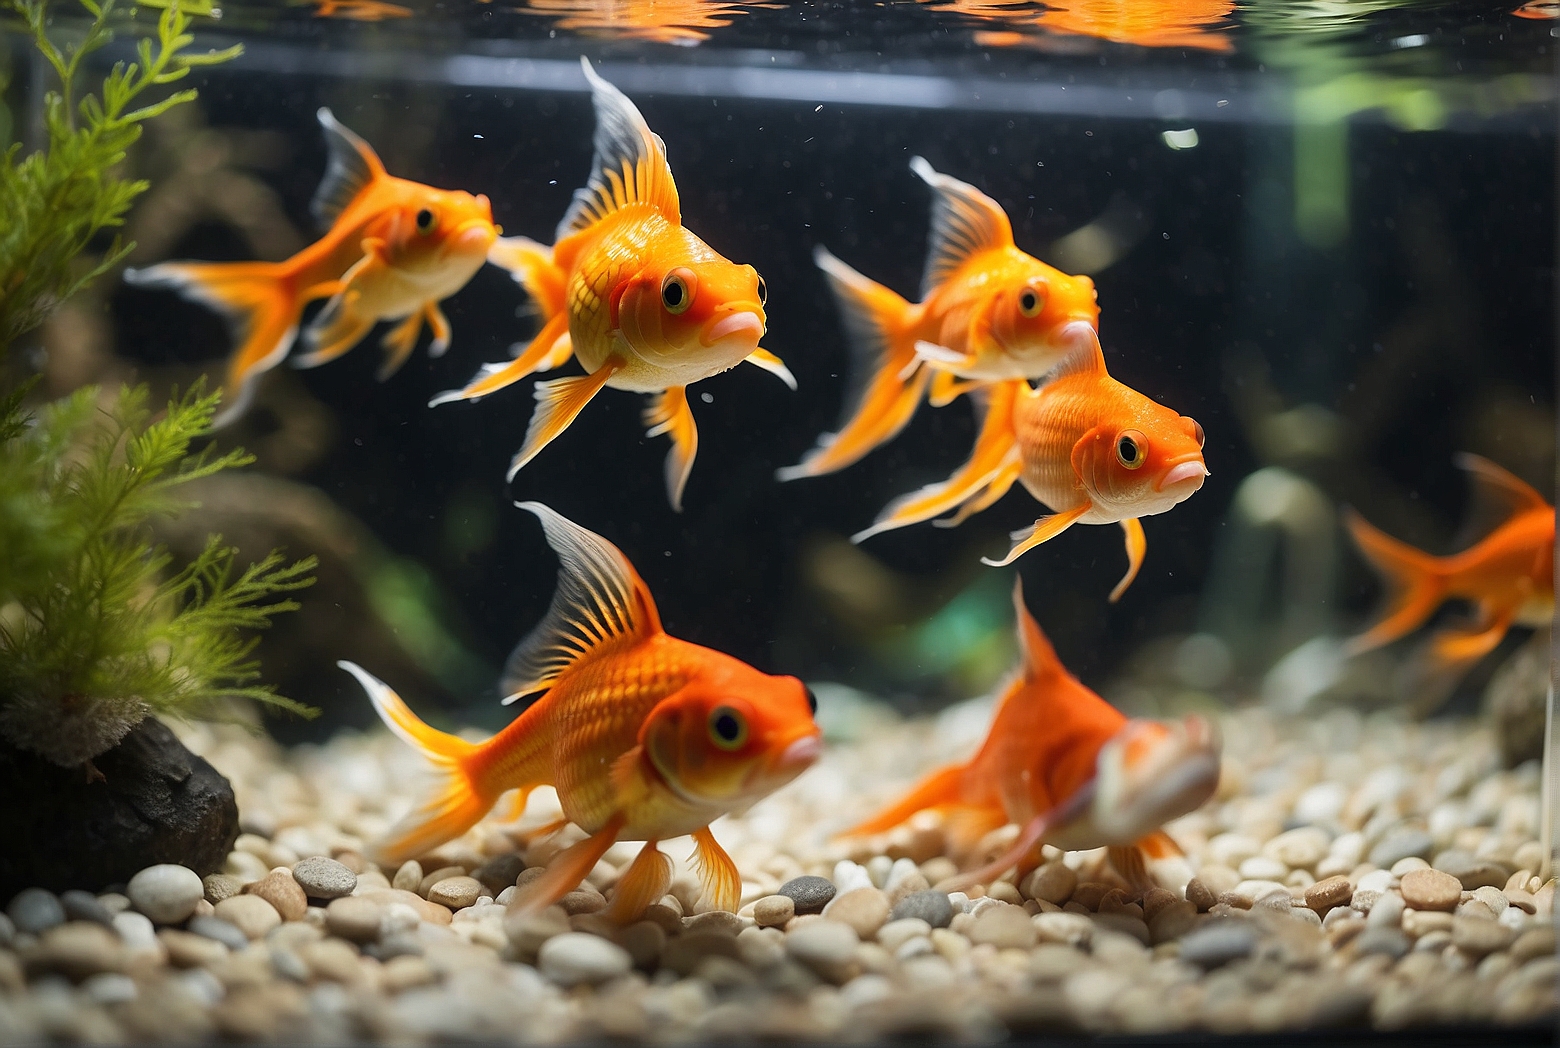 How Many Goldfish Should I Keep in a 10 Gallon Tank?